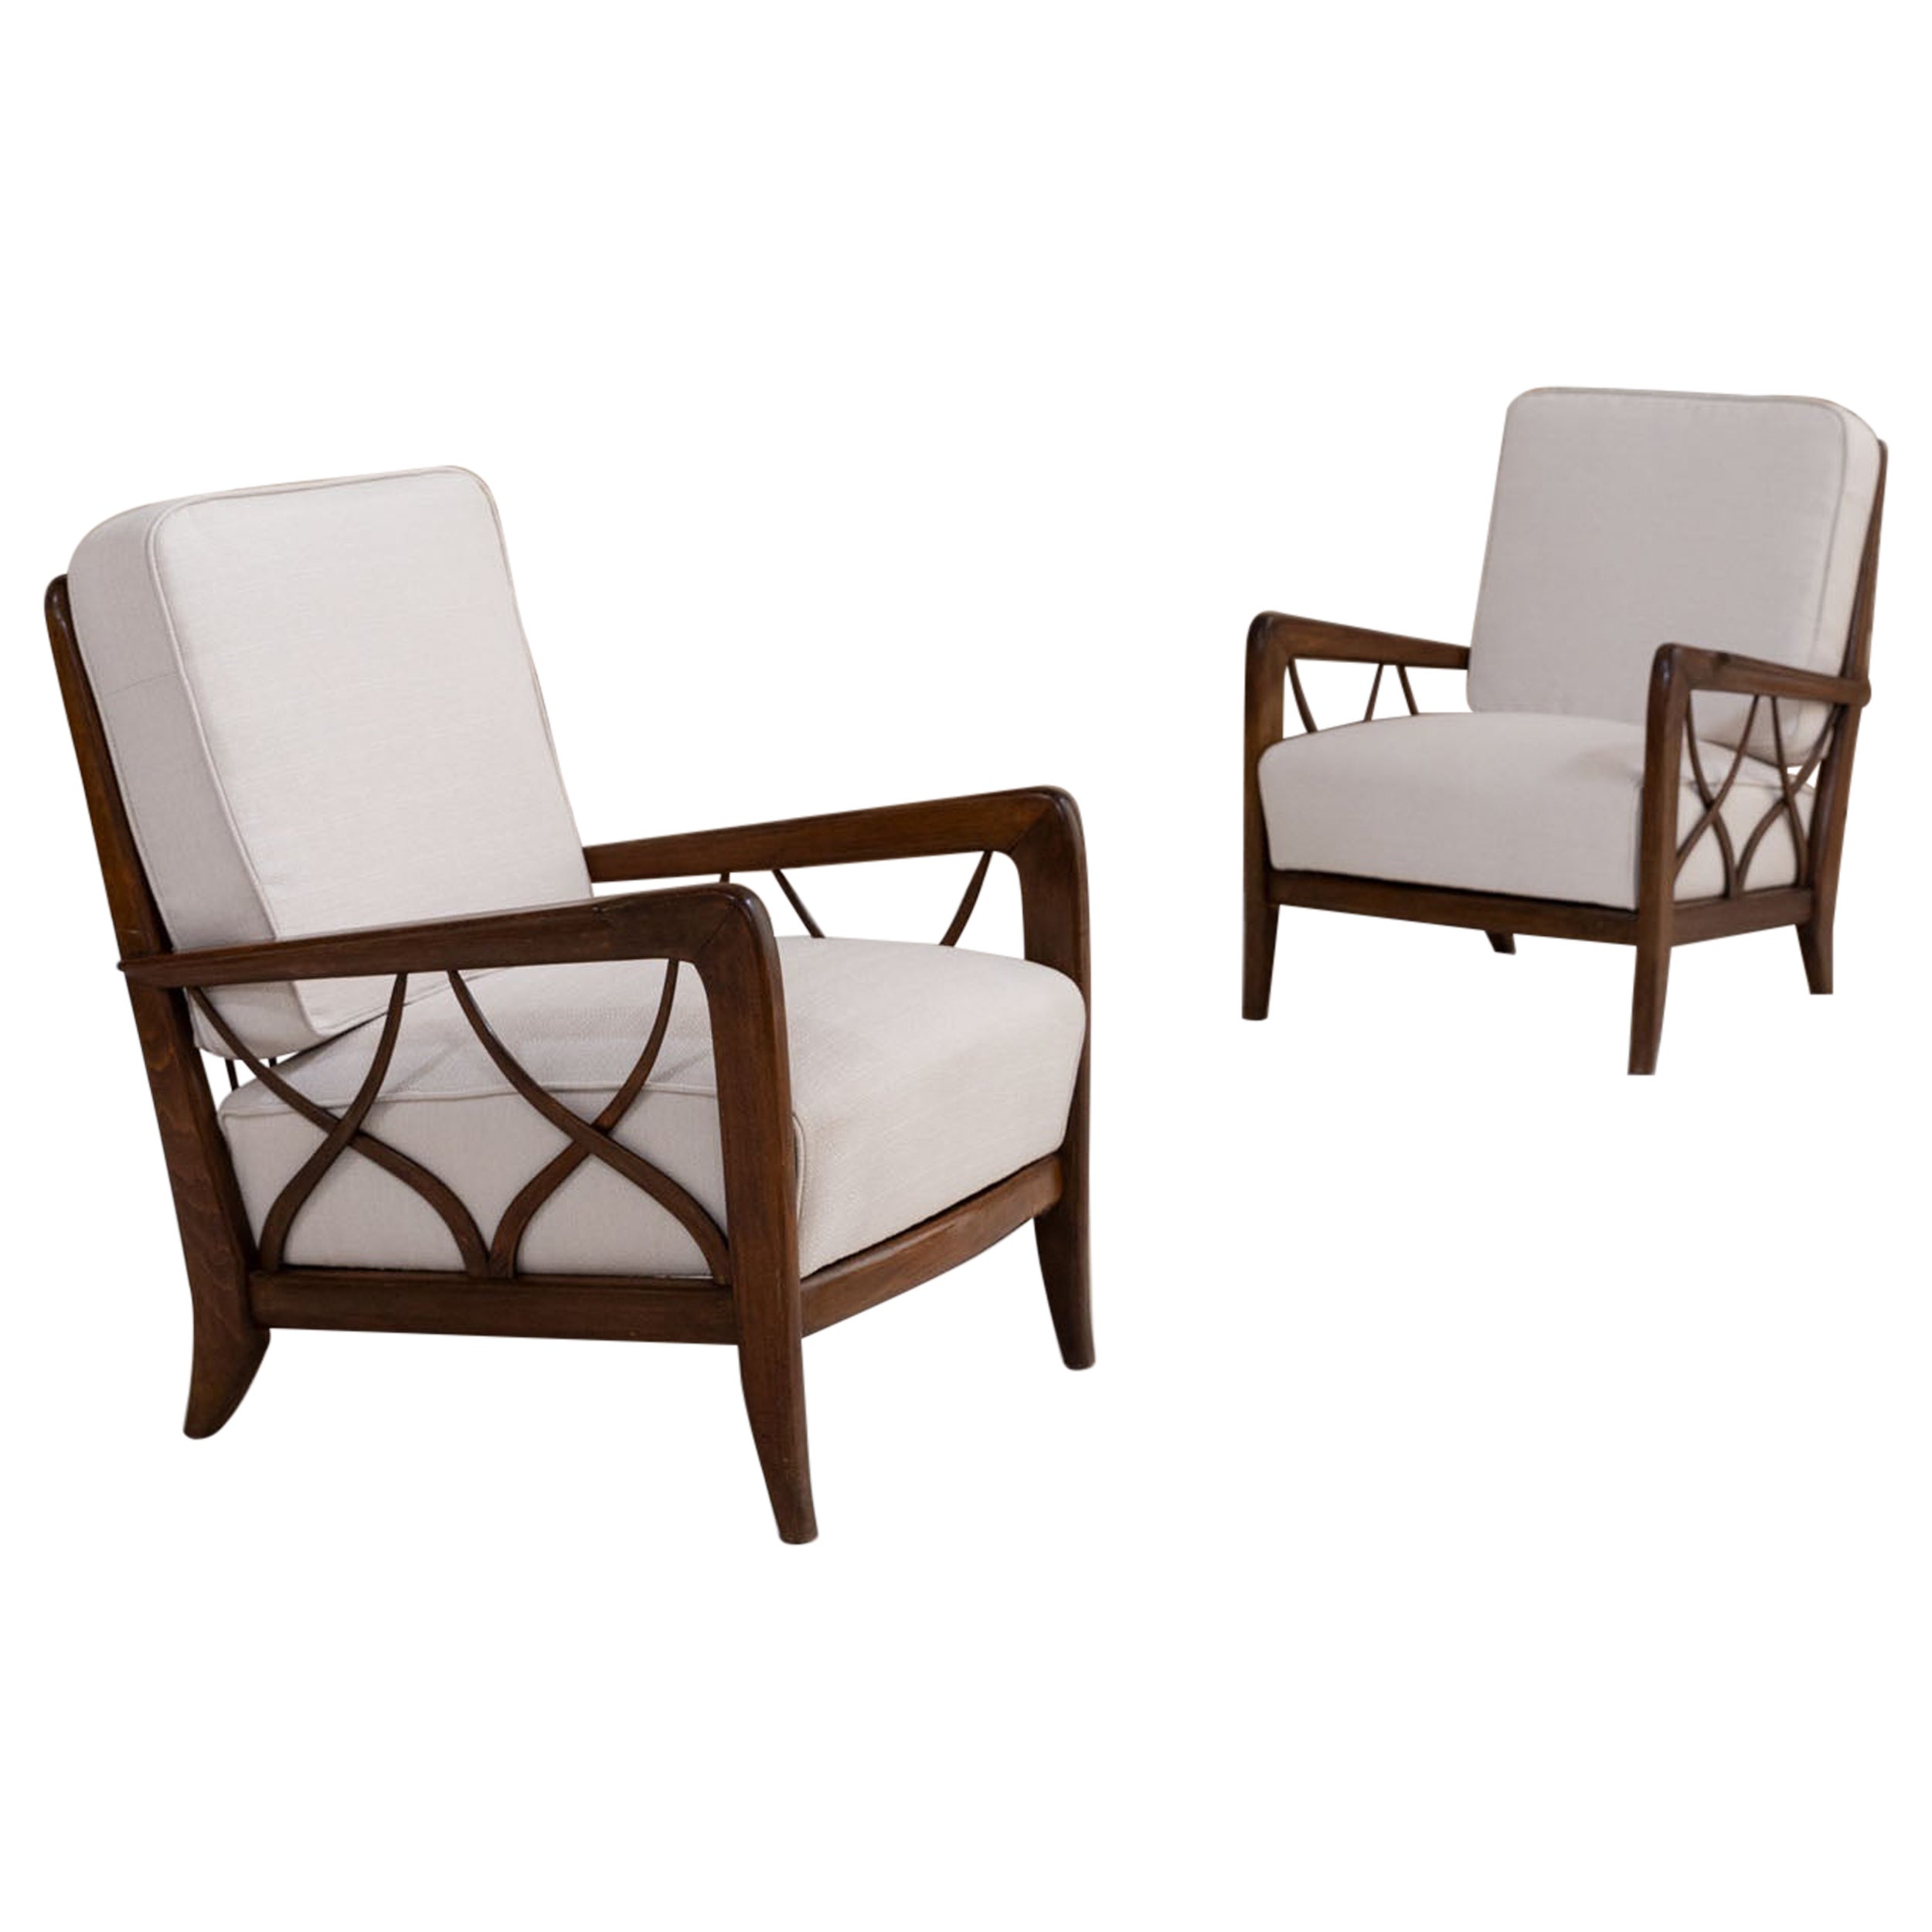 Midcentury pair of armchairs designed by Paolo Buffa